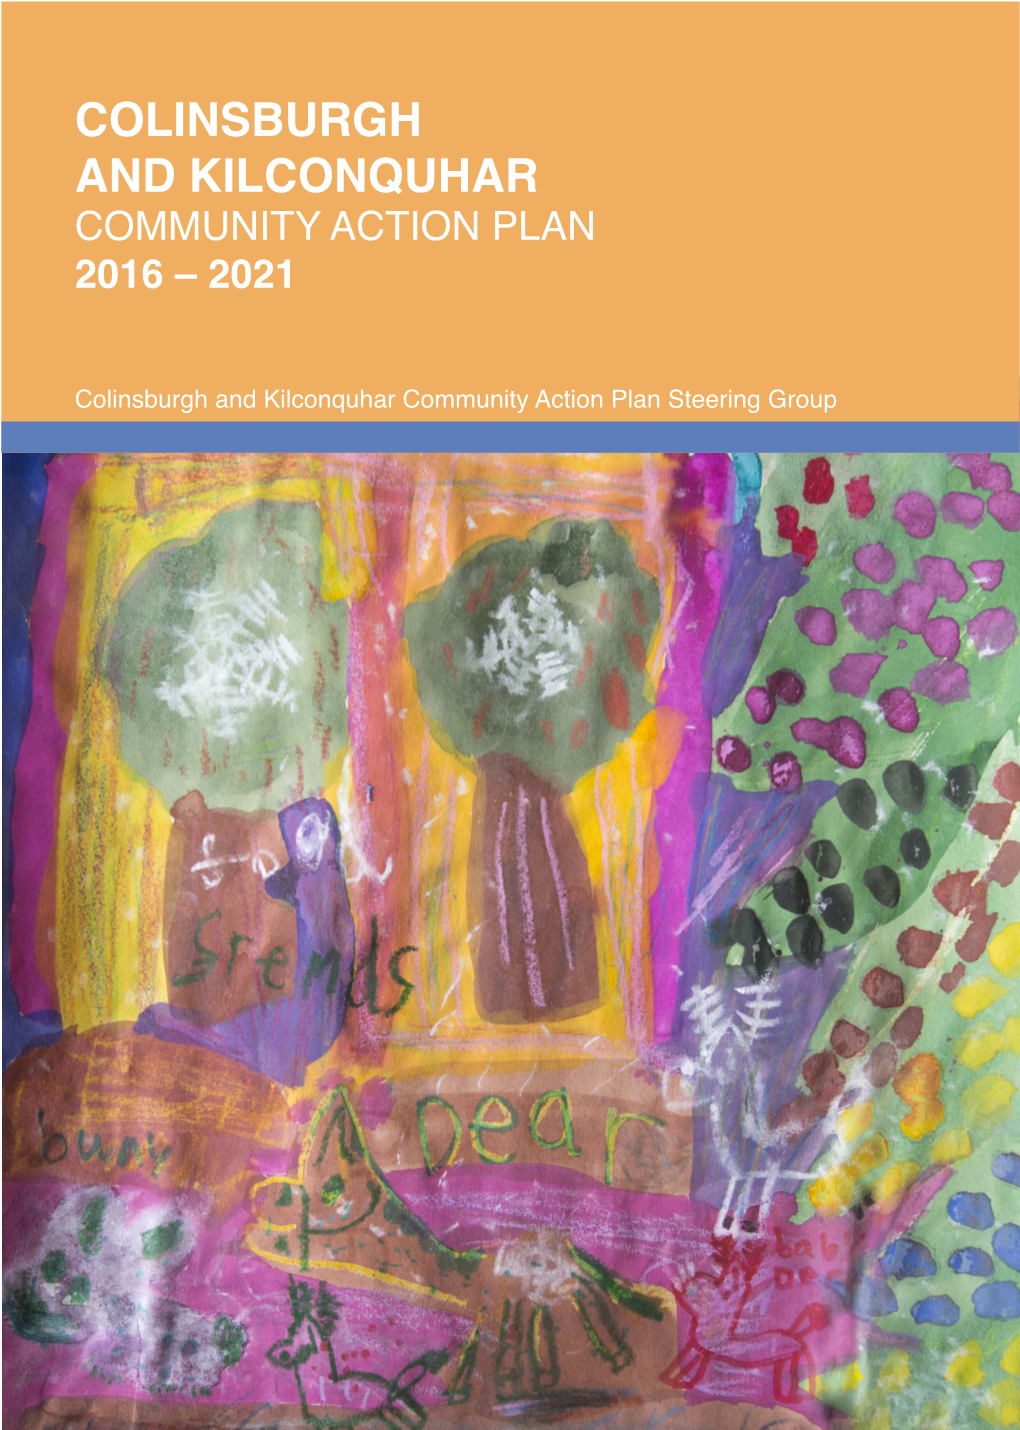 Colinsburgh and Kilconquhar Community Action Plan 2016 – 2021